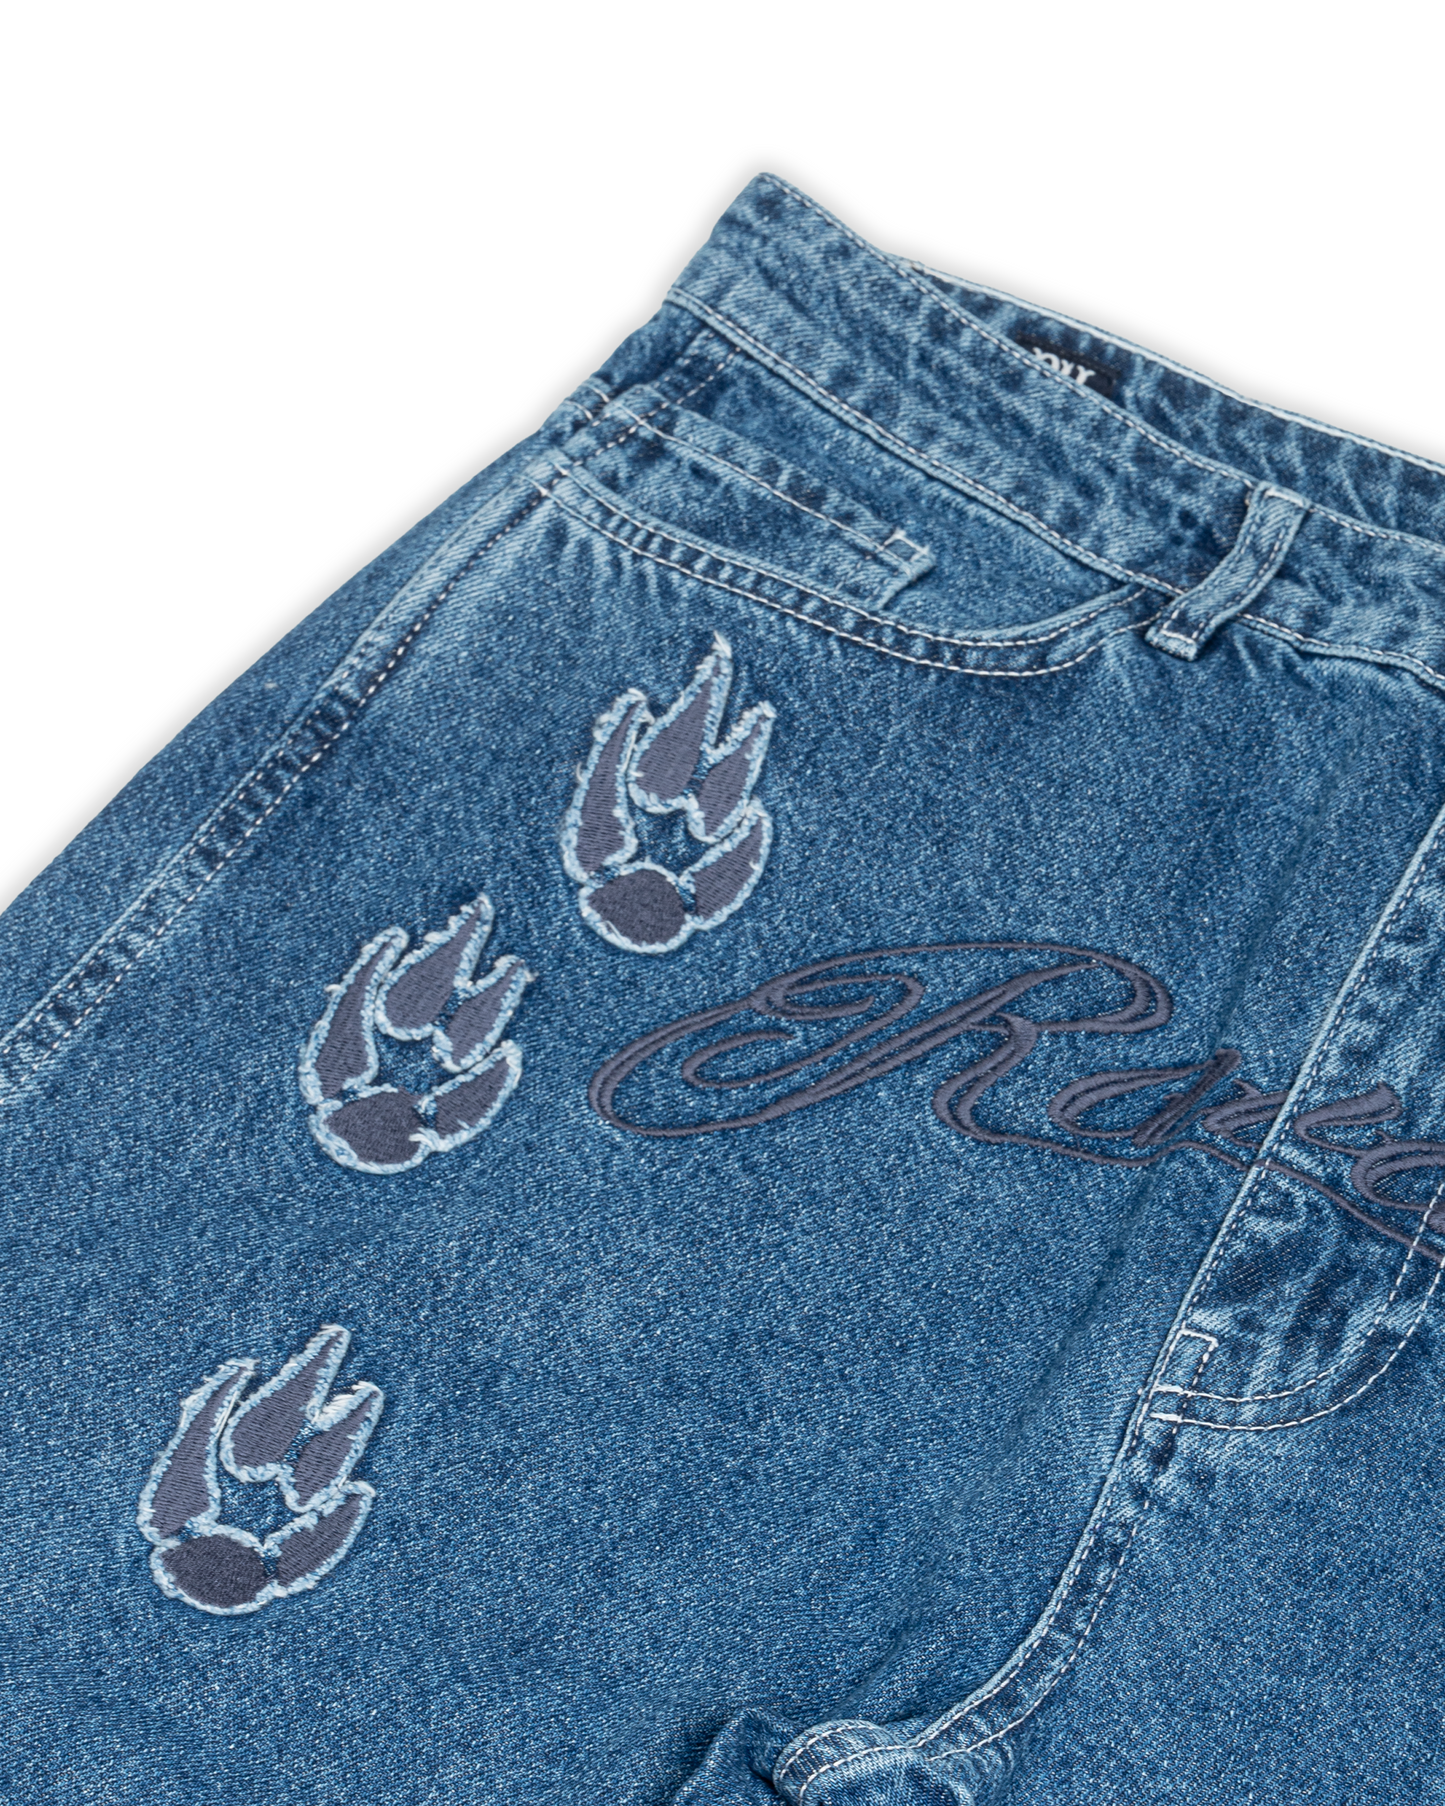 Paws Jeans Washed Mid Blue